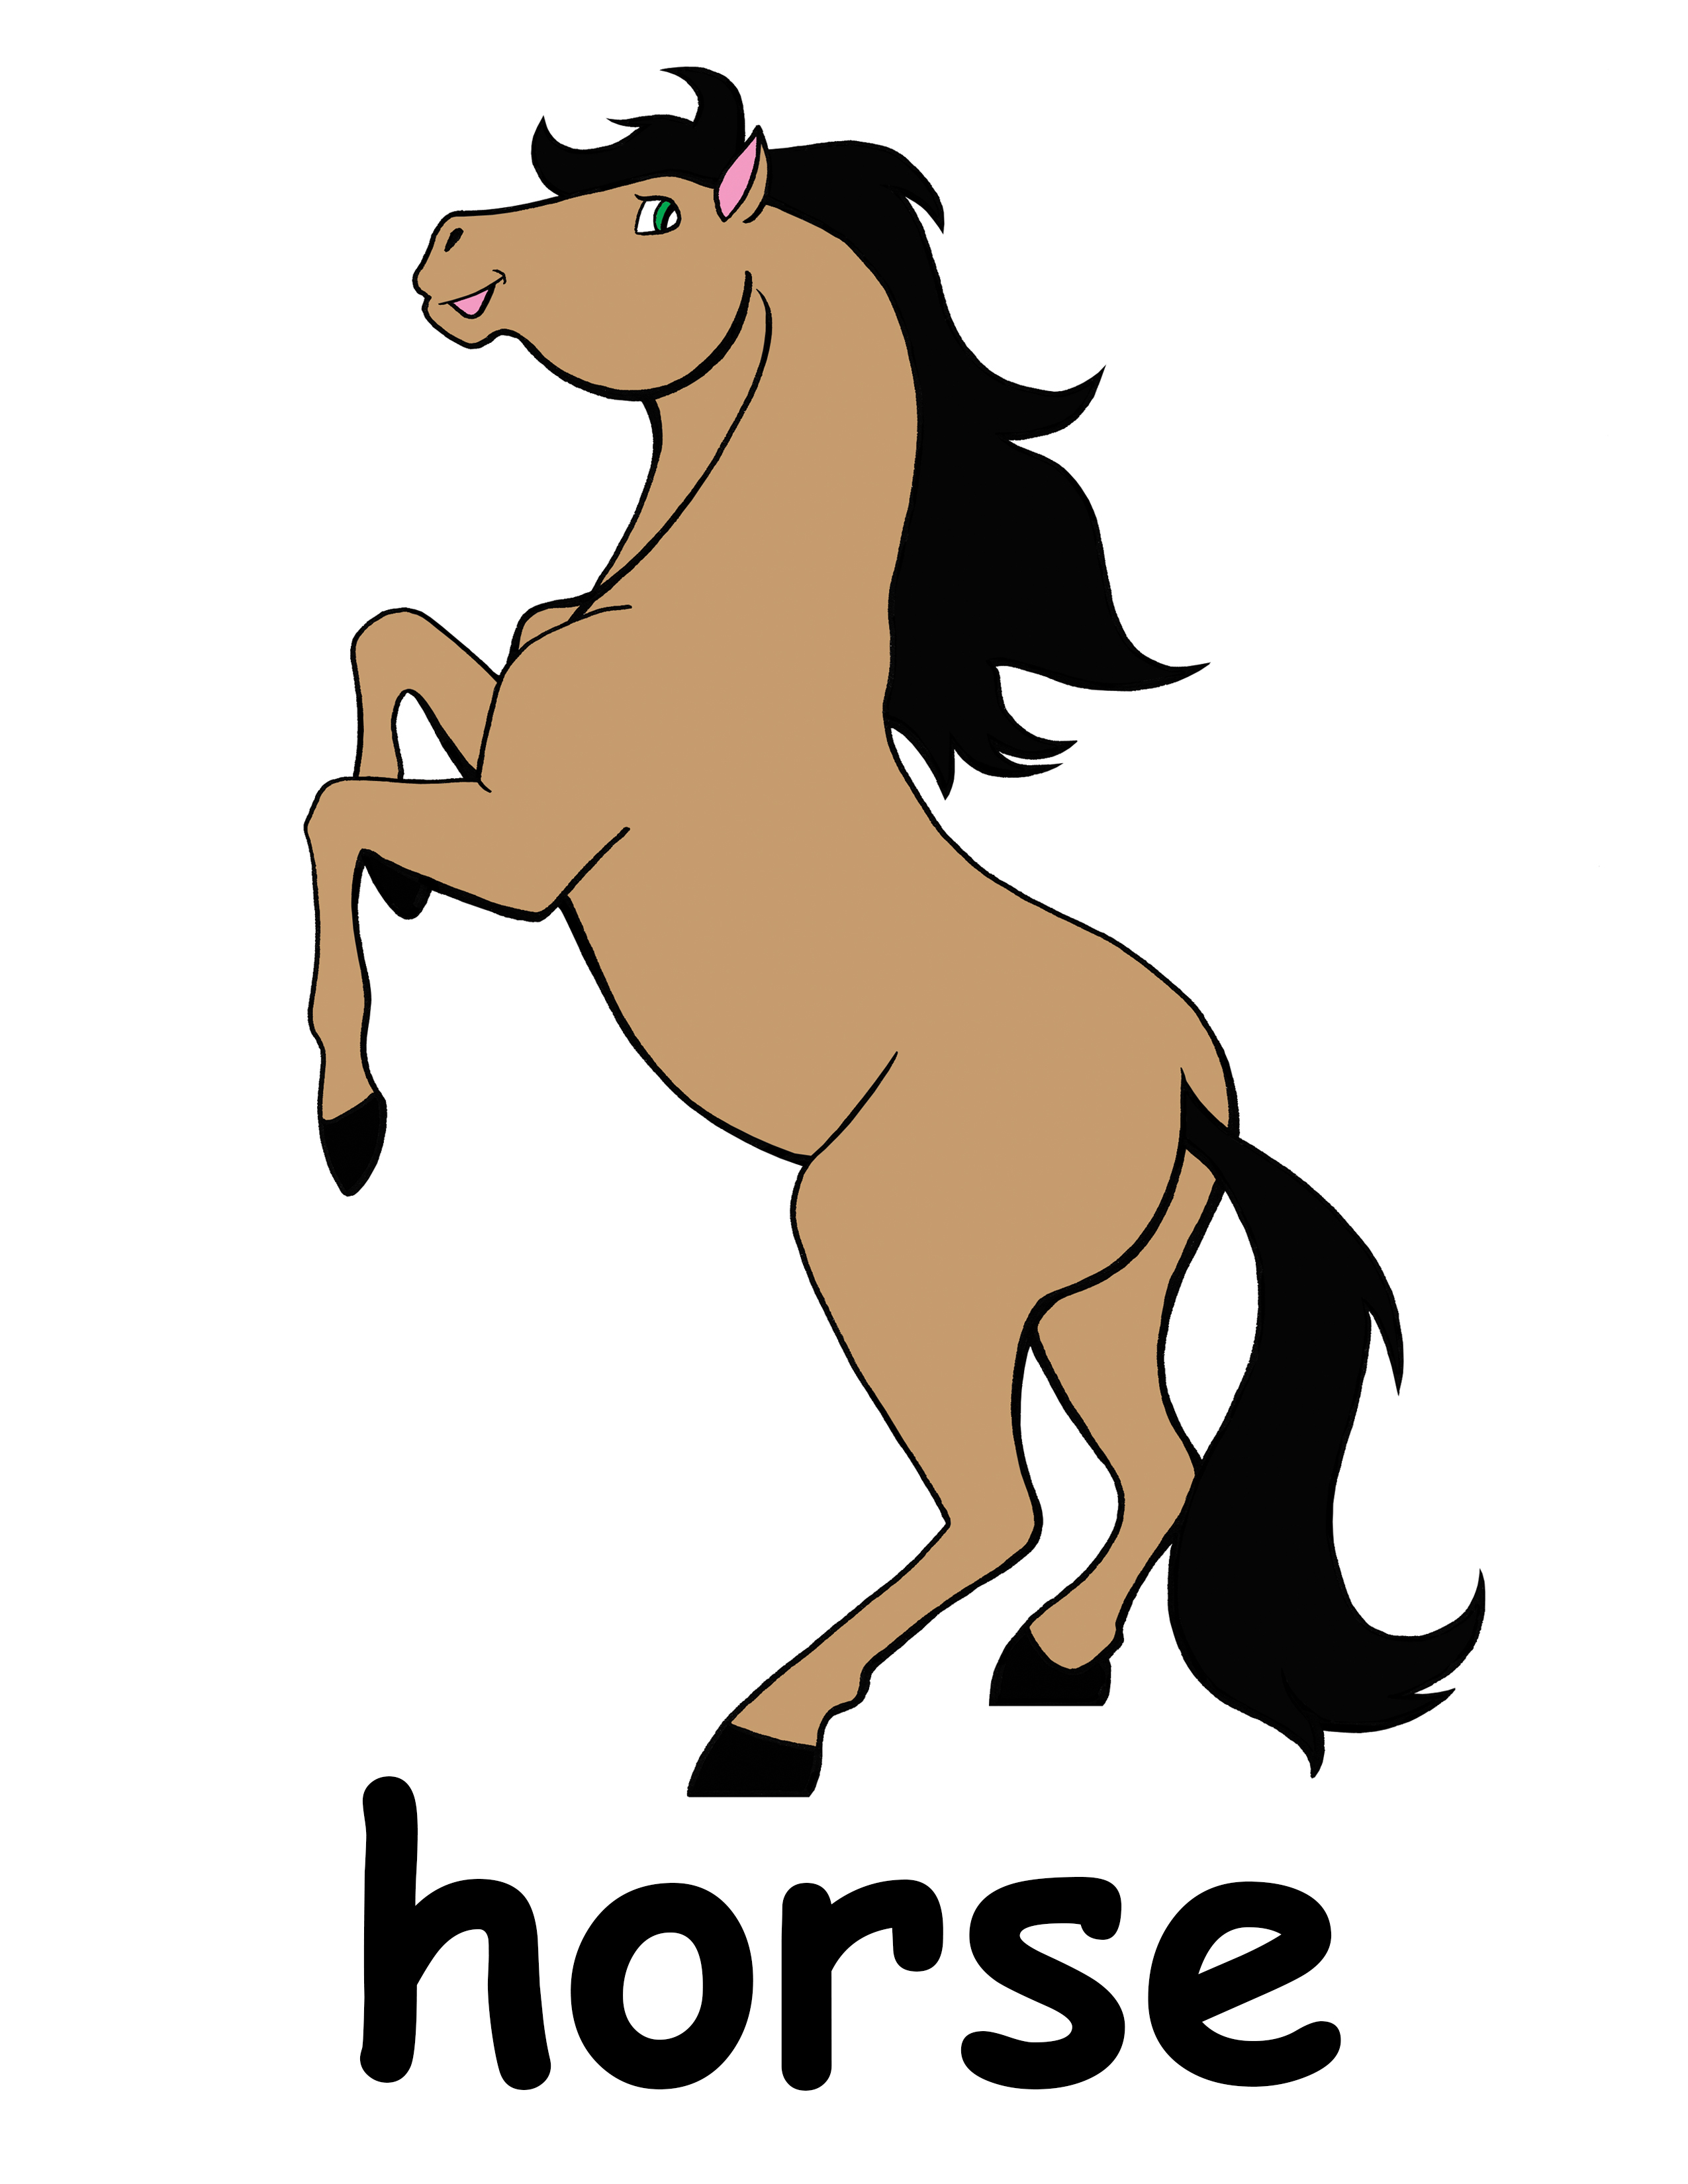 20549 Horse free clipart.